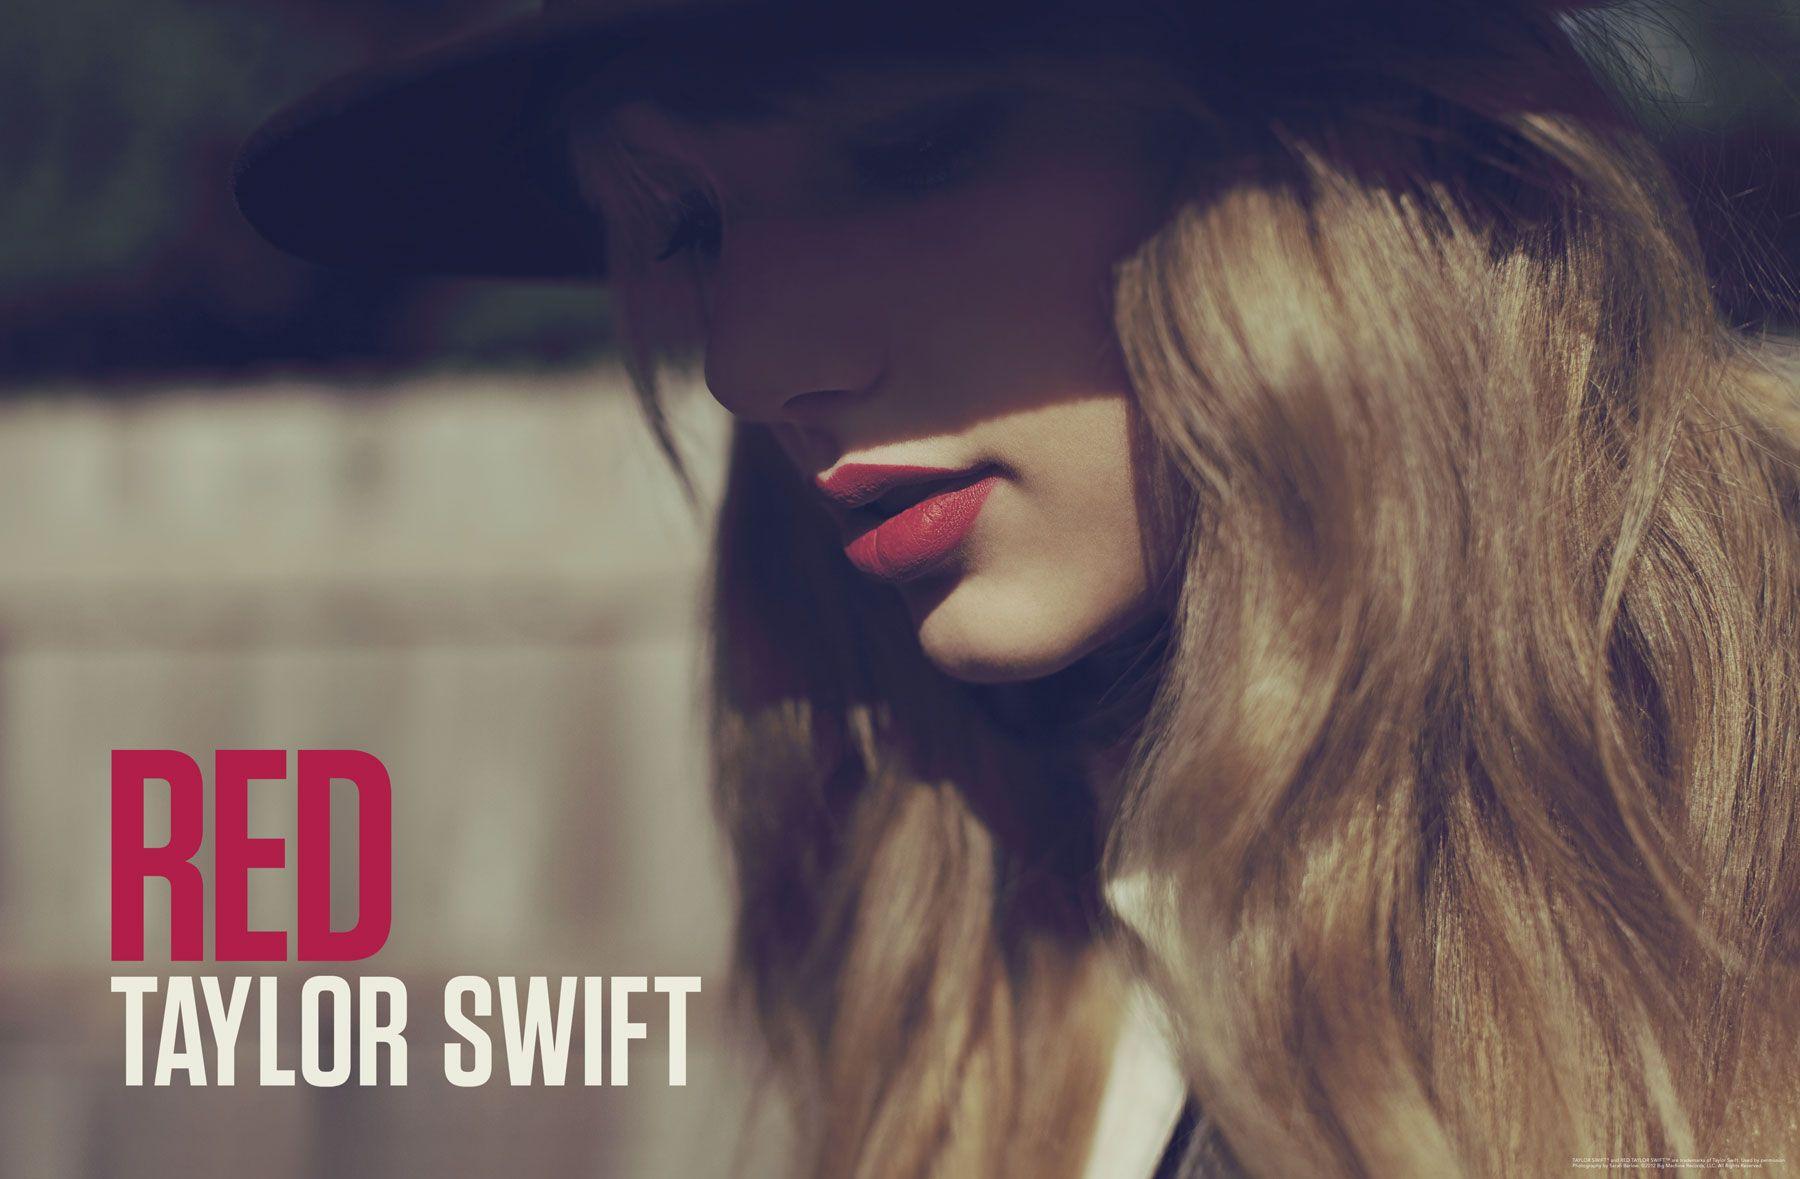 taylor swift red album cover